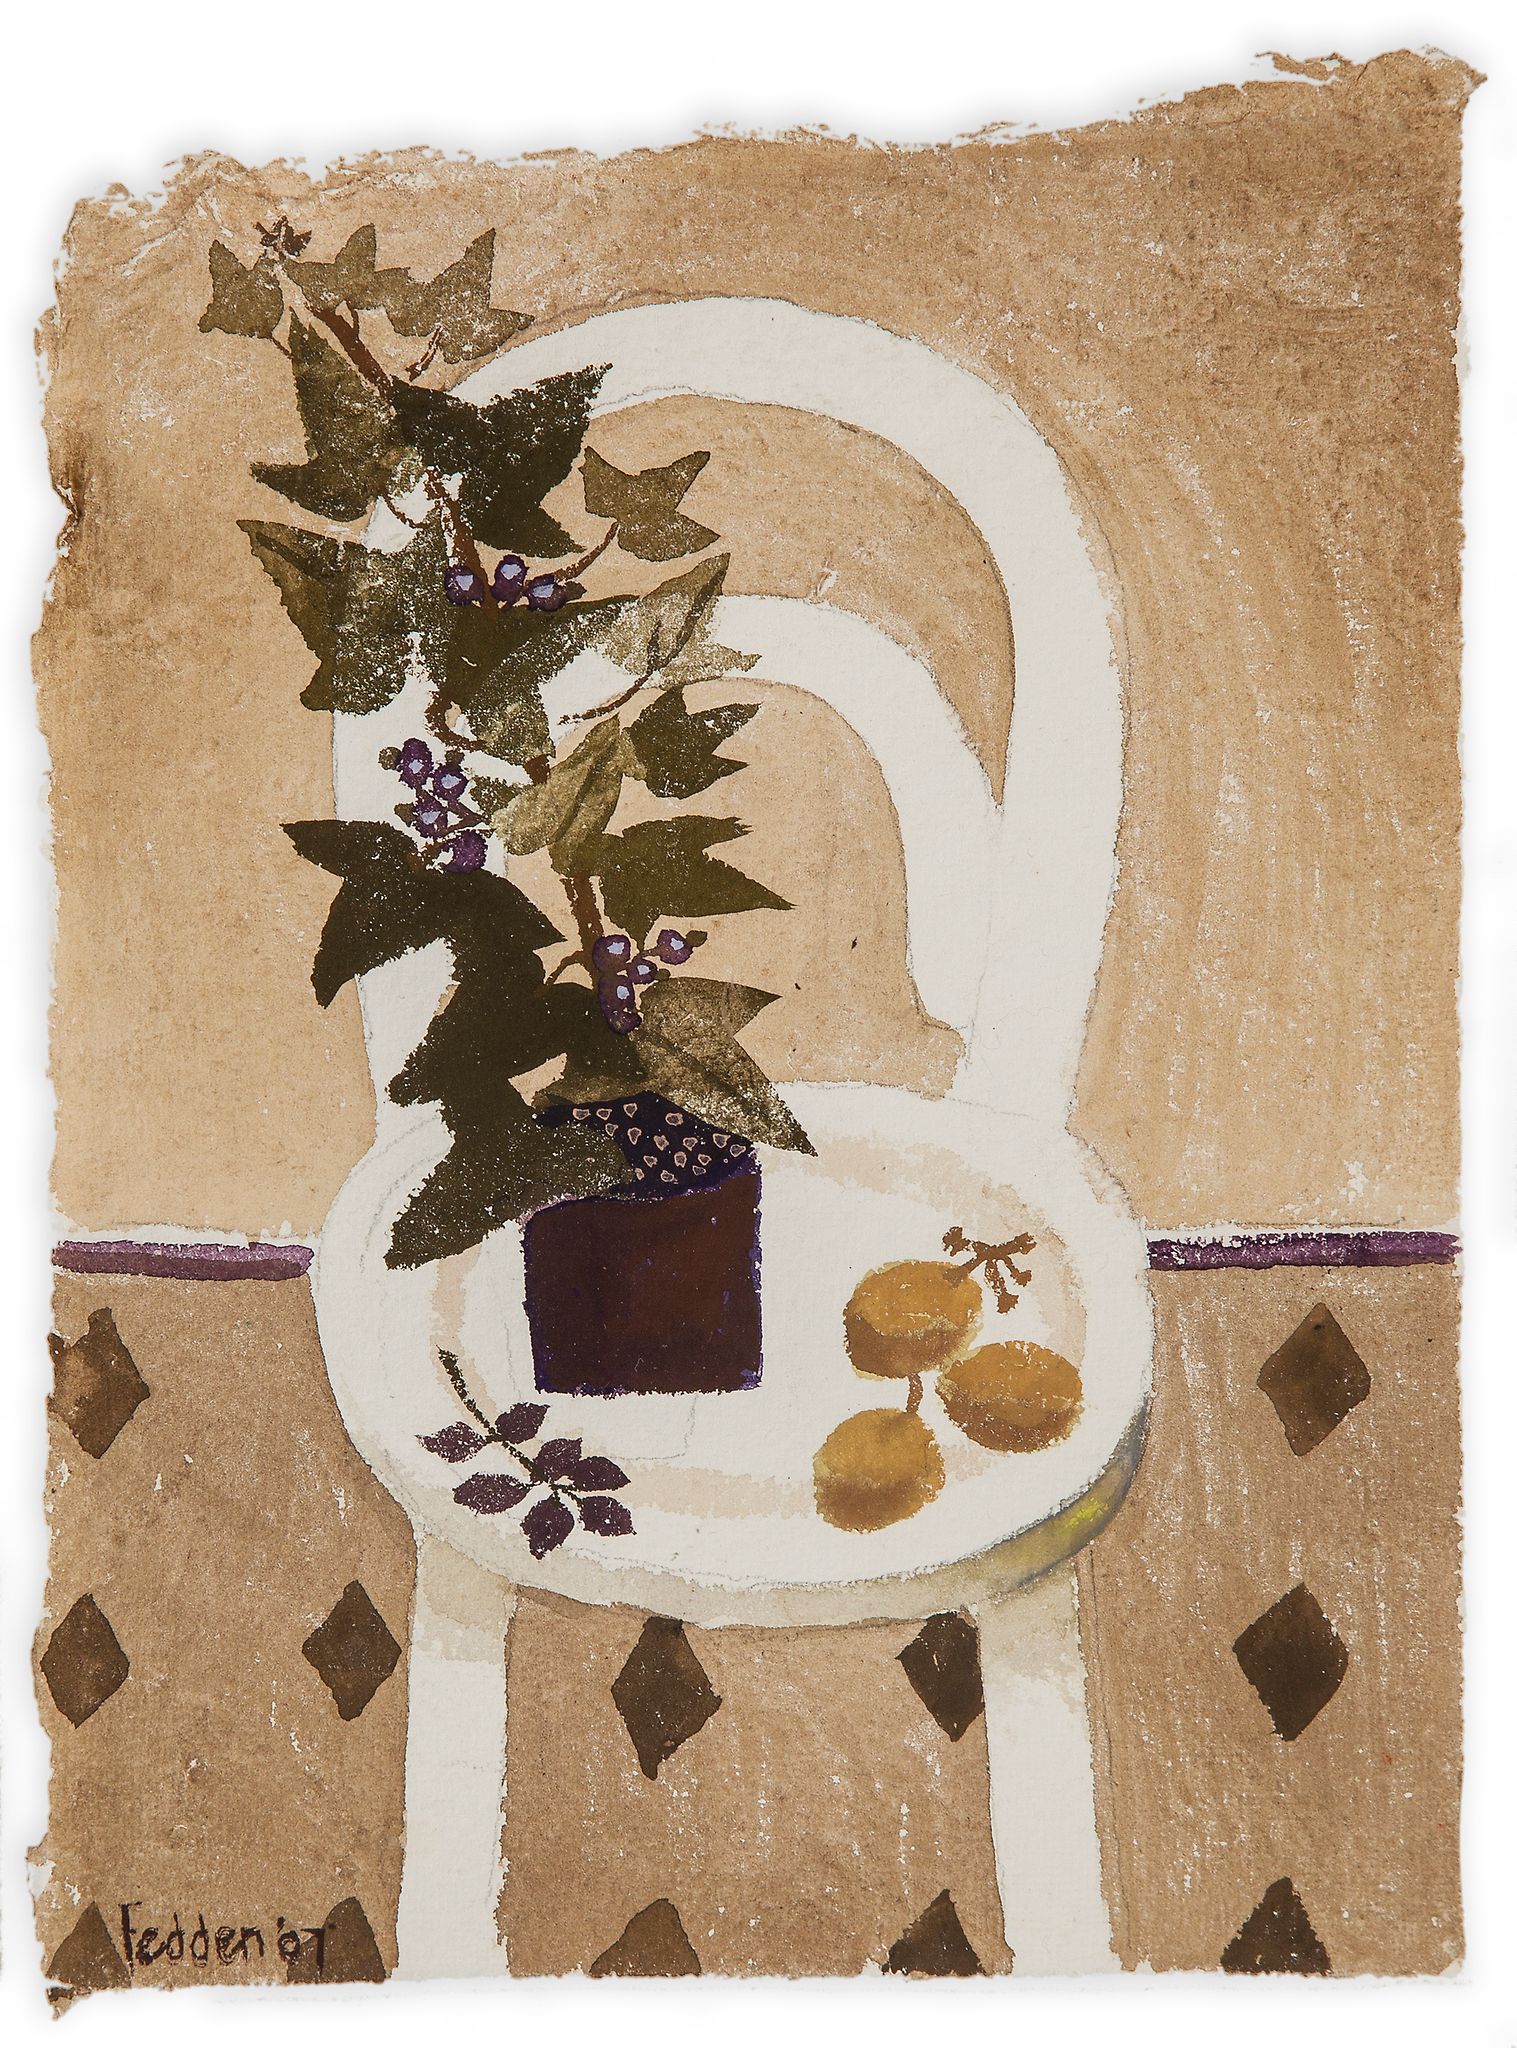 Mary Fedden (1915-2012) - Still Life with White Chair Watercolour and gouache on paper Signed and